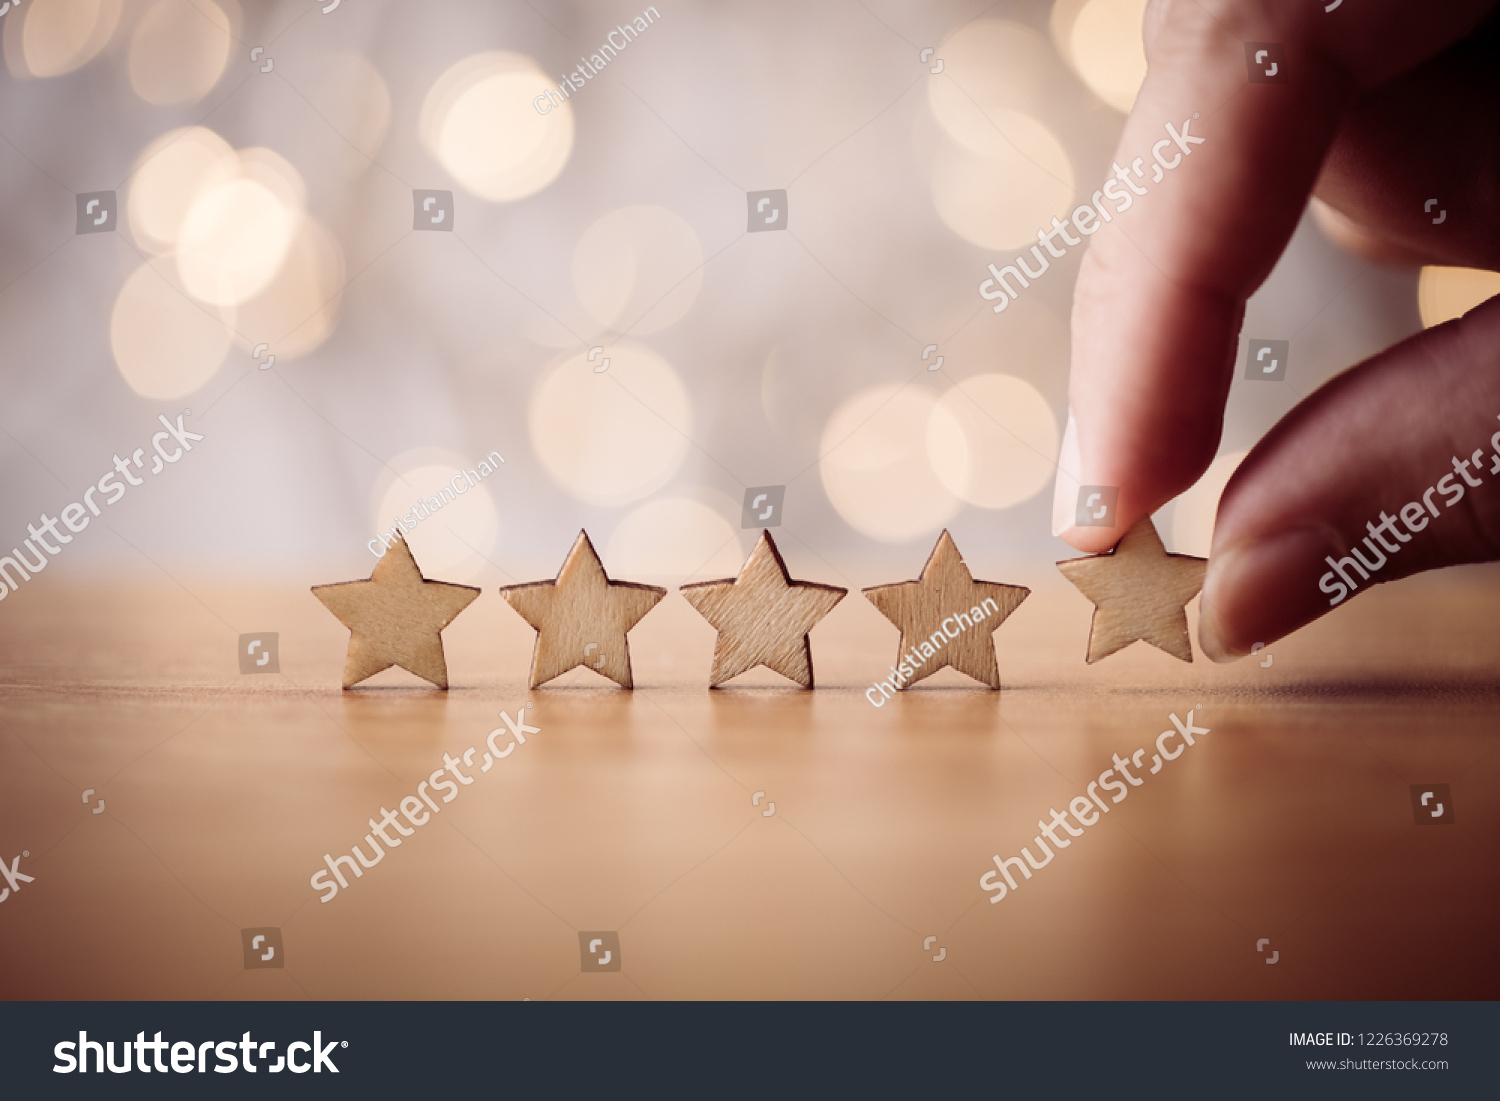 Hand putting wooden five star shape on table. The best excellent business services rating customer experience concept. #1226369278